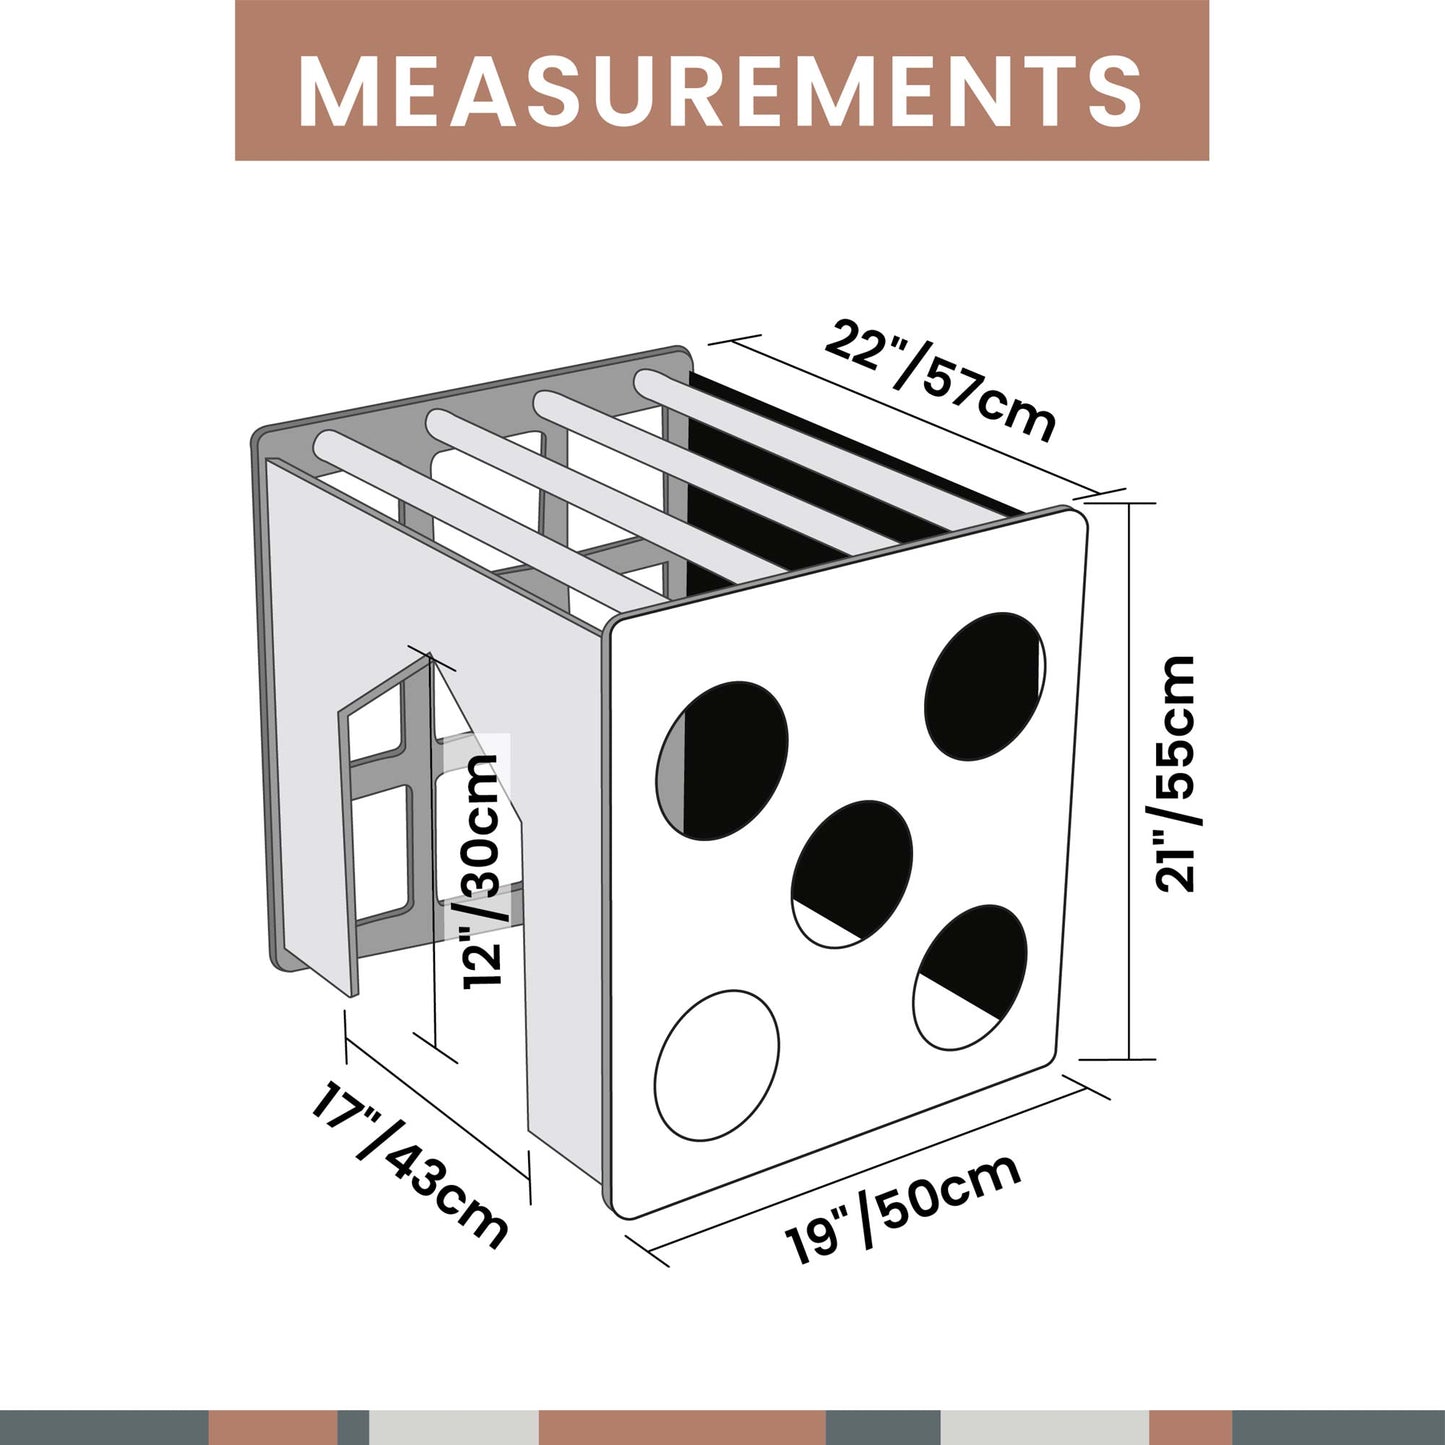 A diagram showing the measurements of the Sweet Home From Wood activity cube with sensory panels.